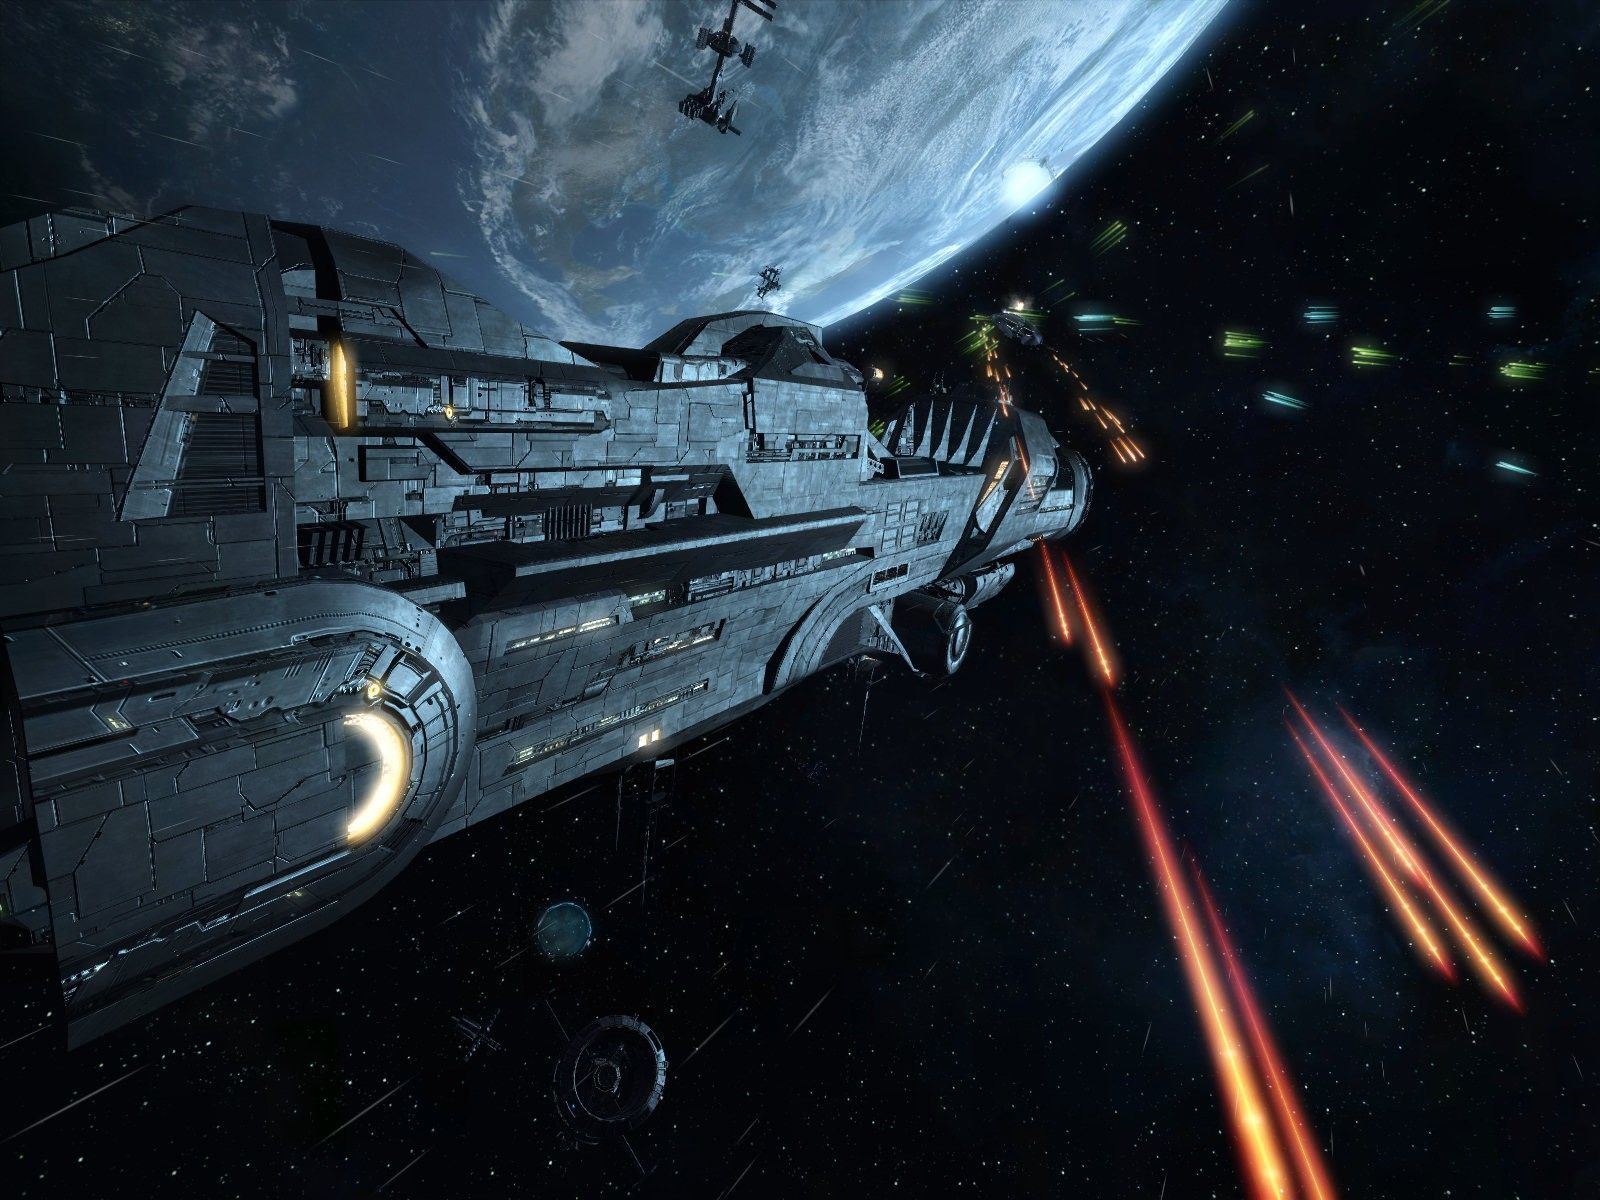 Space Battle Wallpaper to Cover Your Desktop in Glory. Space battles, Spaceship art, Stargate universe